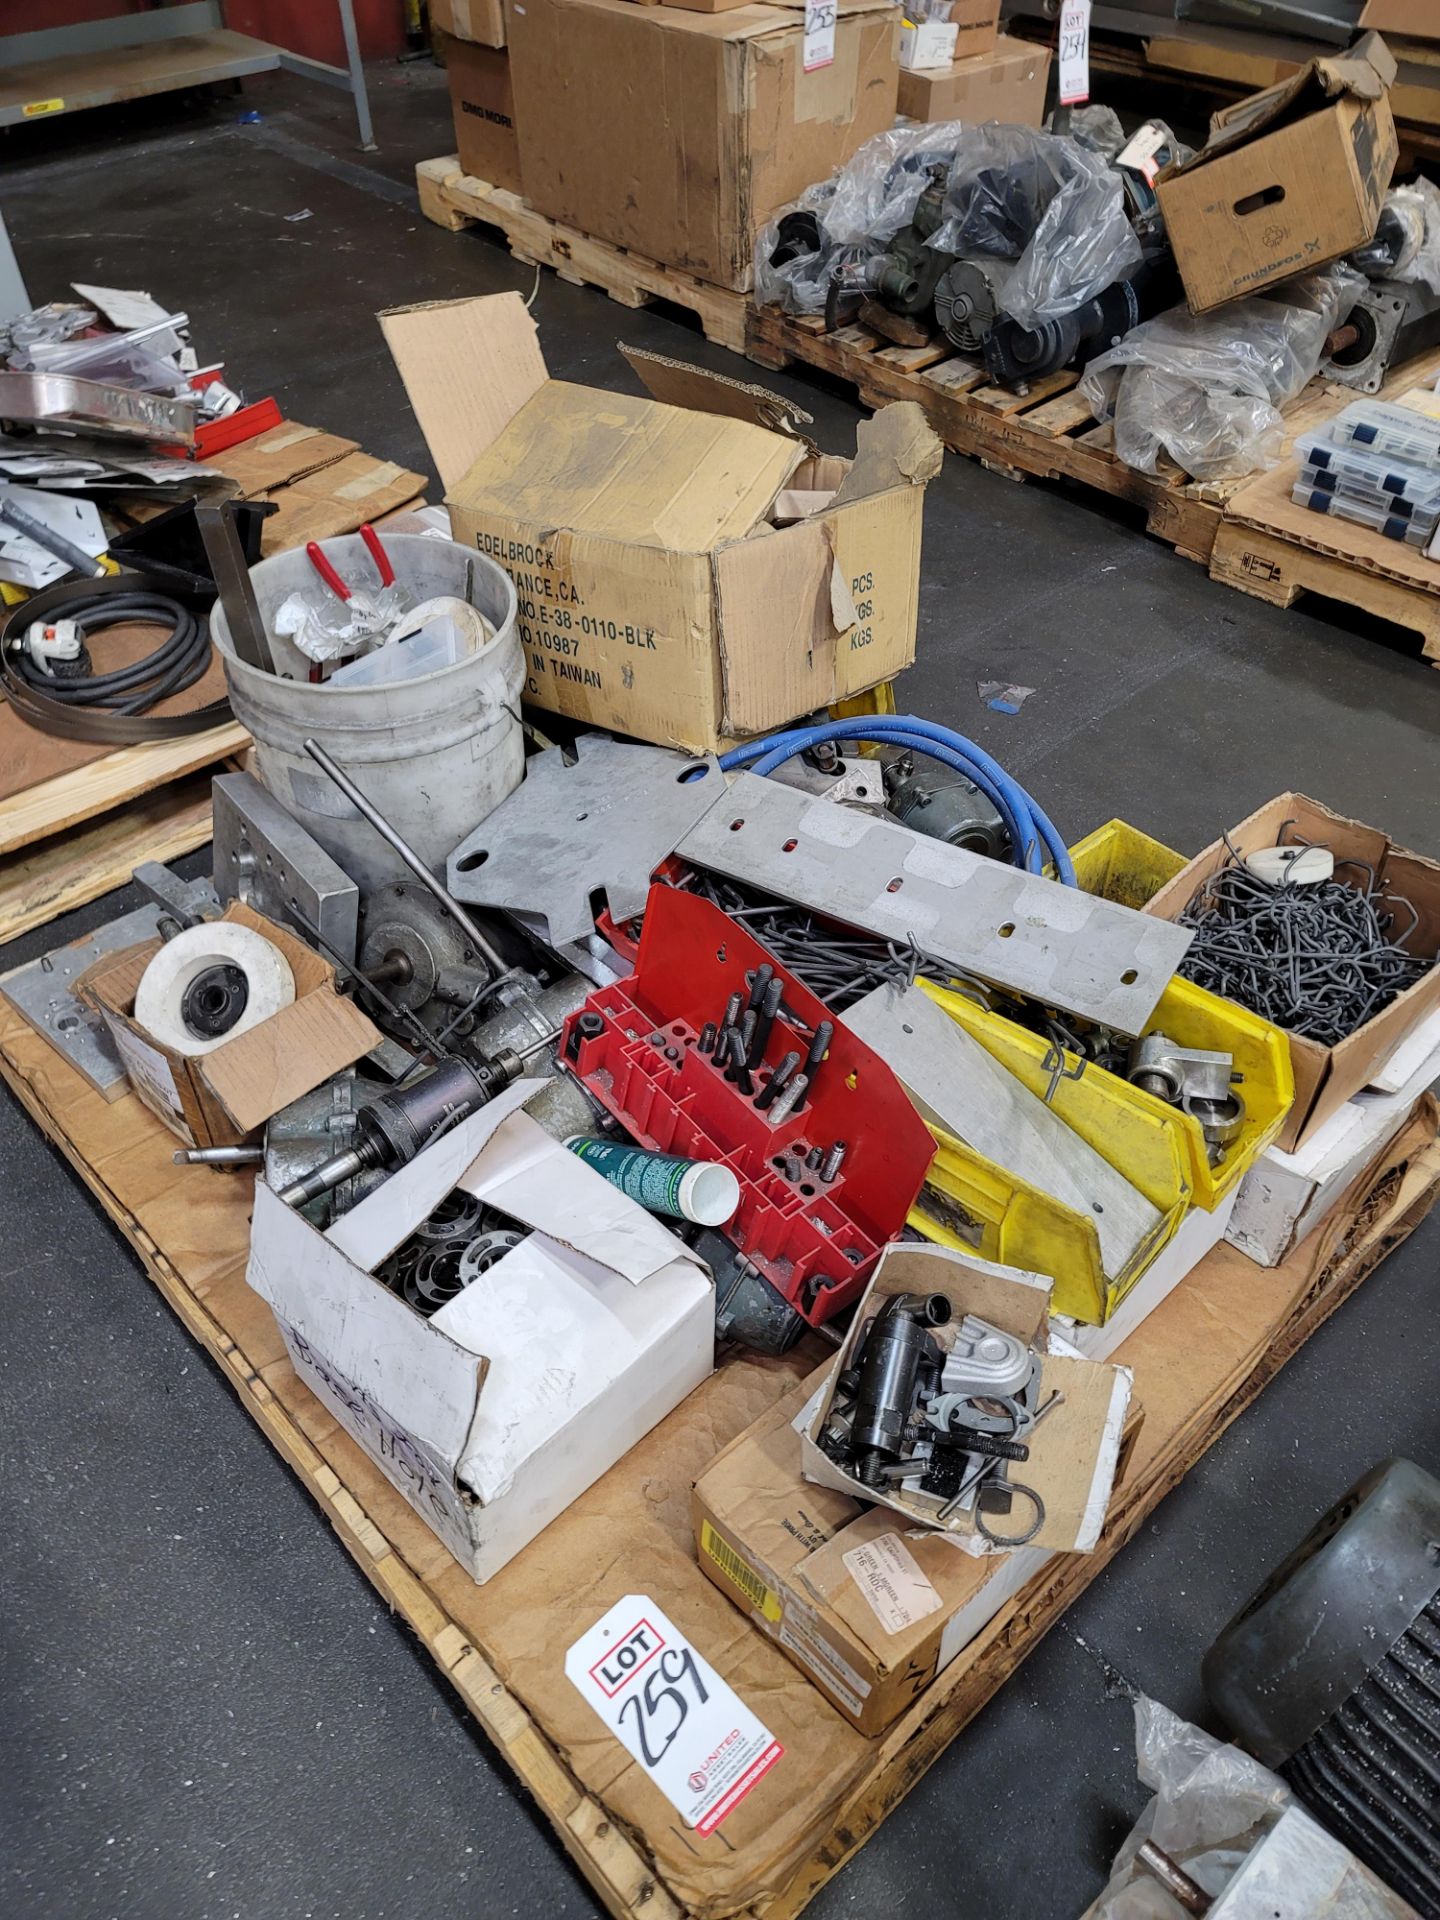 LOT - THREAD TAPPERS, MACHINE SHOP ITEMS, ETC.